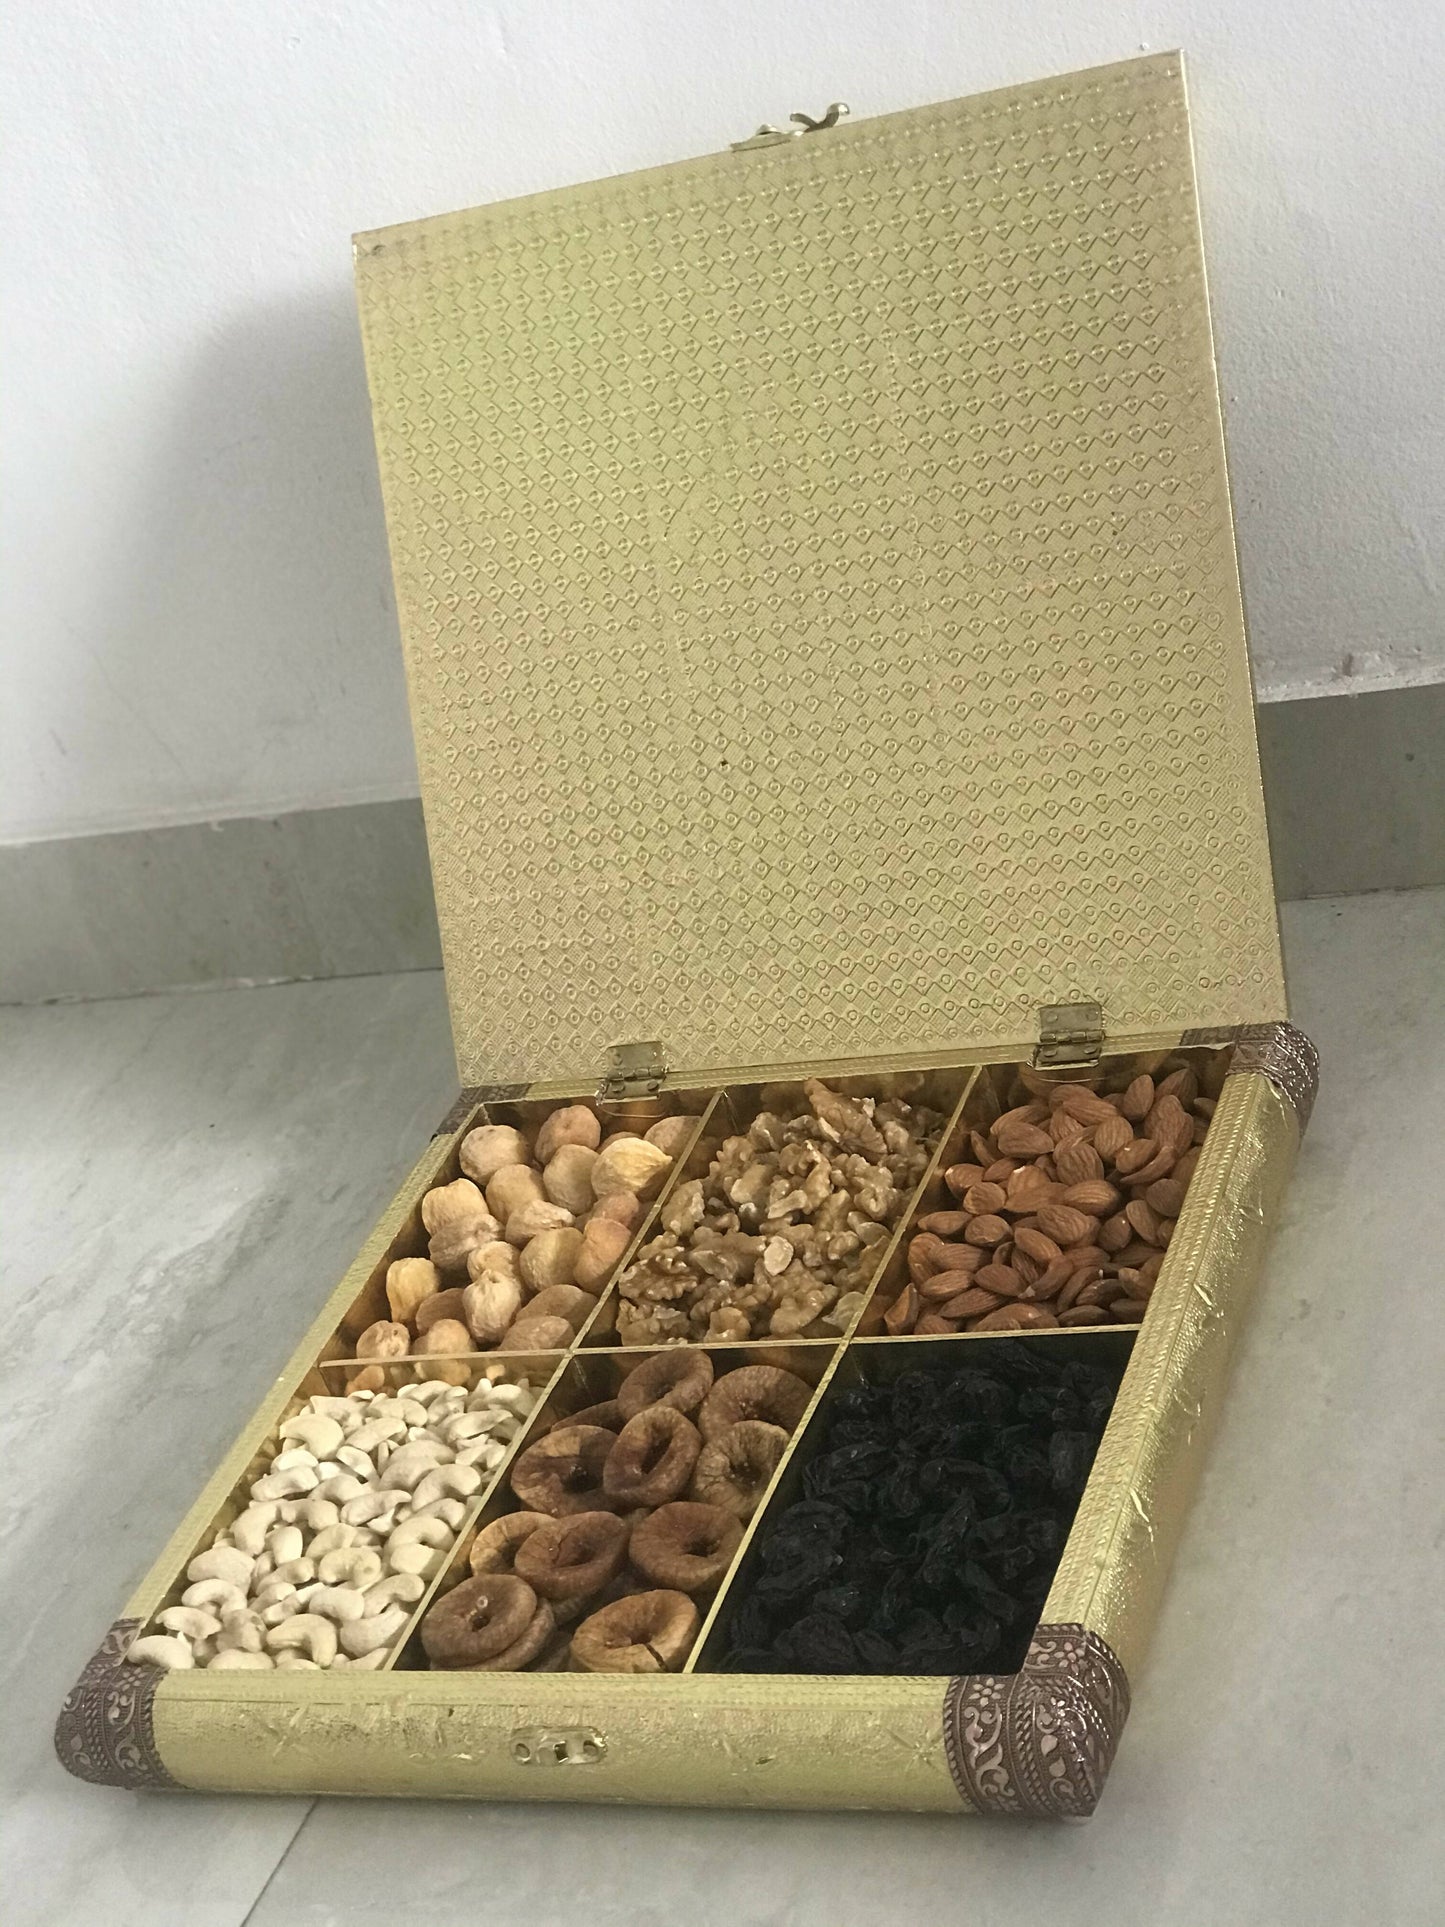 SK Mithaii | Assorted Hibiscus Flower Design Dry Fruit Gift Box |Almonds |Apricots |Walnuts | Cashews |Figs | Black Resins